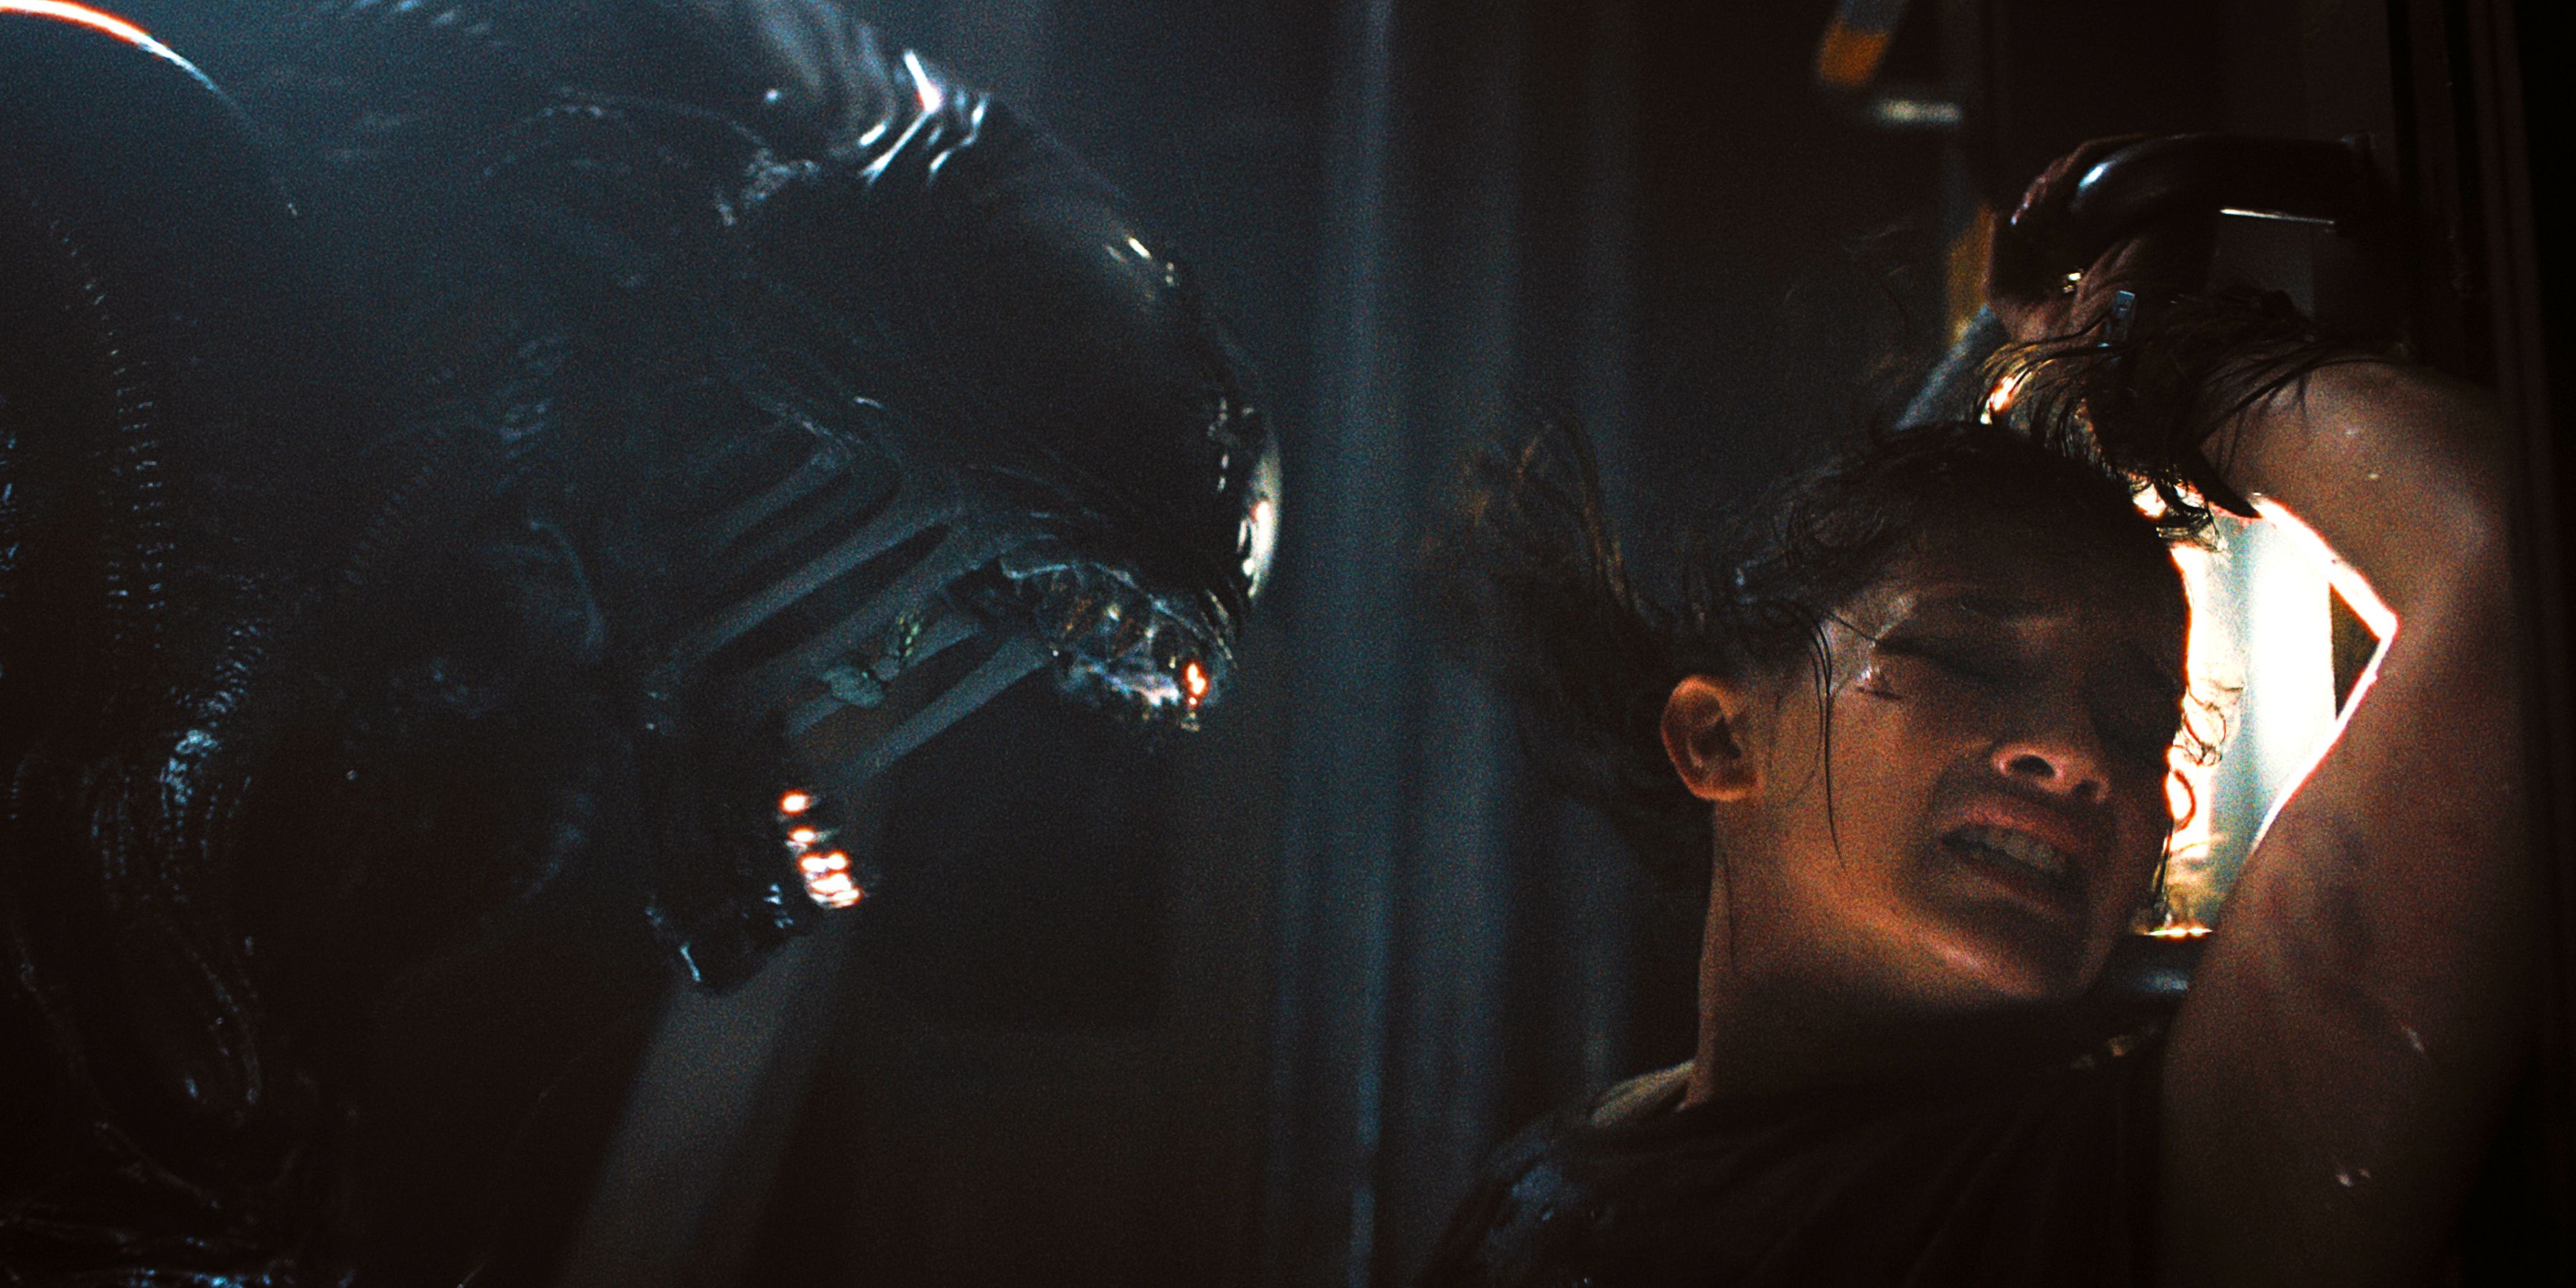 Alien Romulus Xenomorph confronts main character, who screams in shock